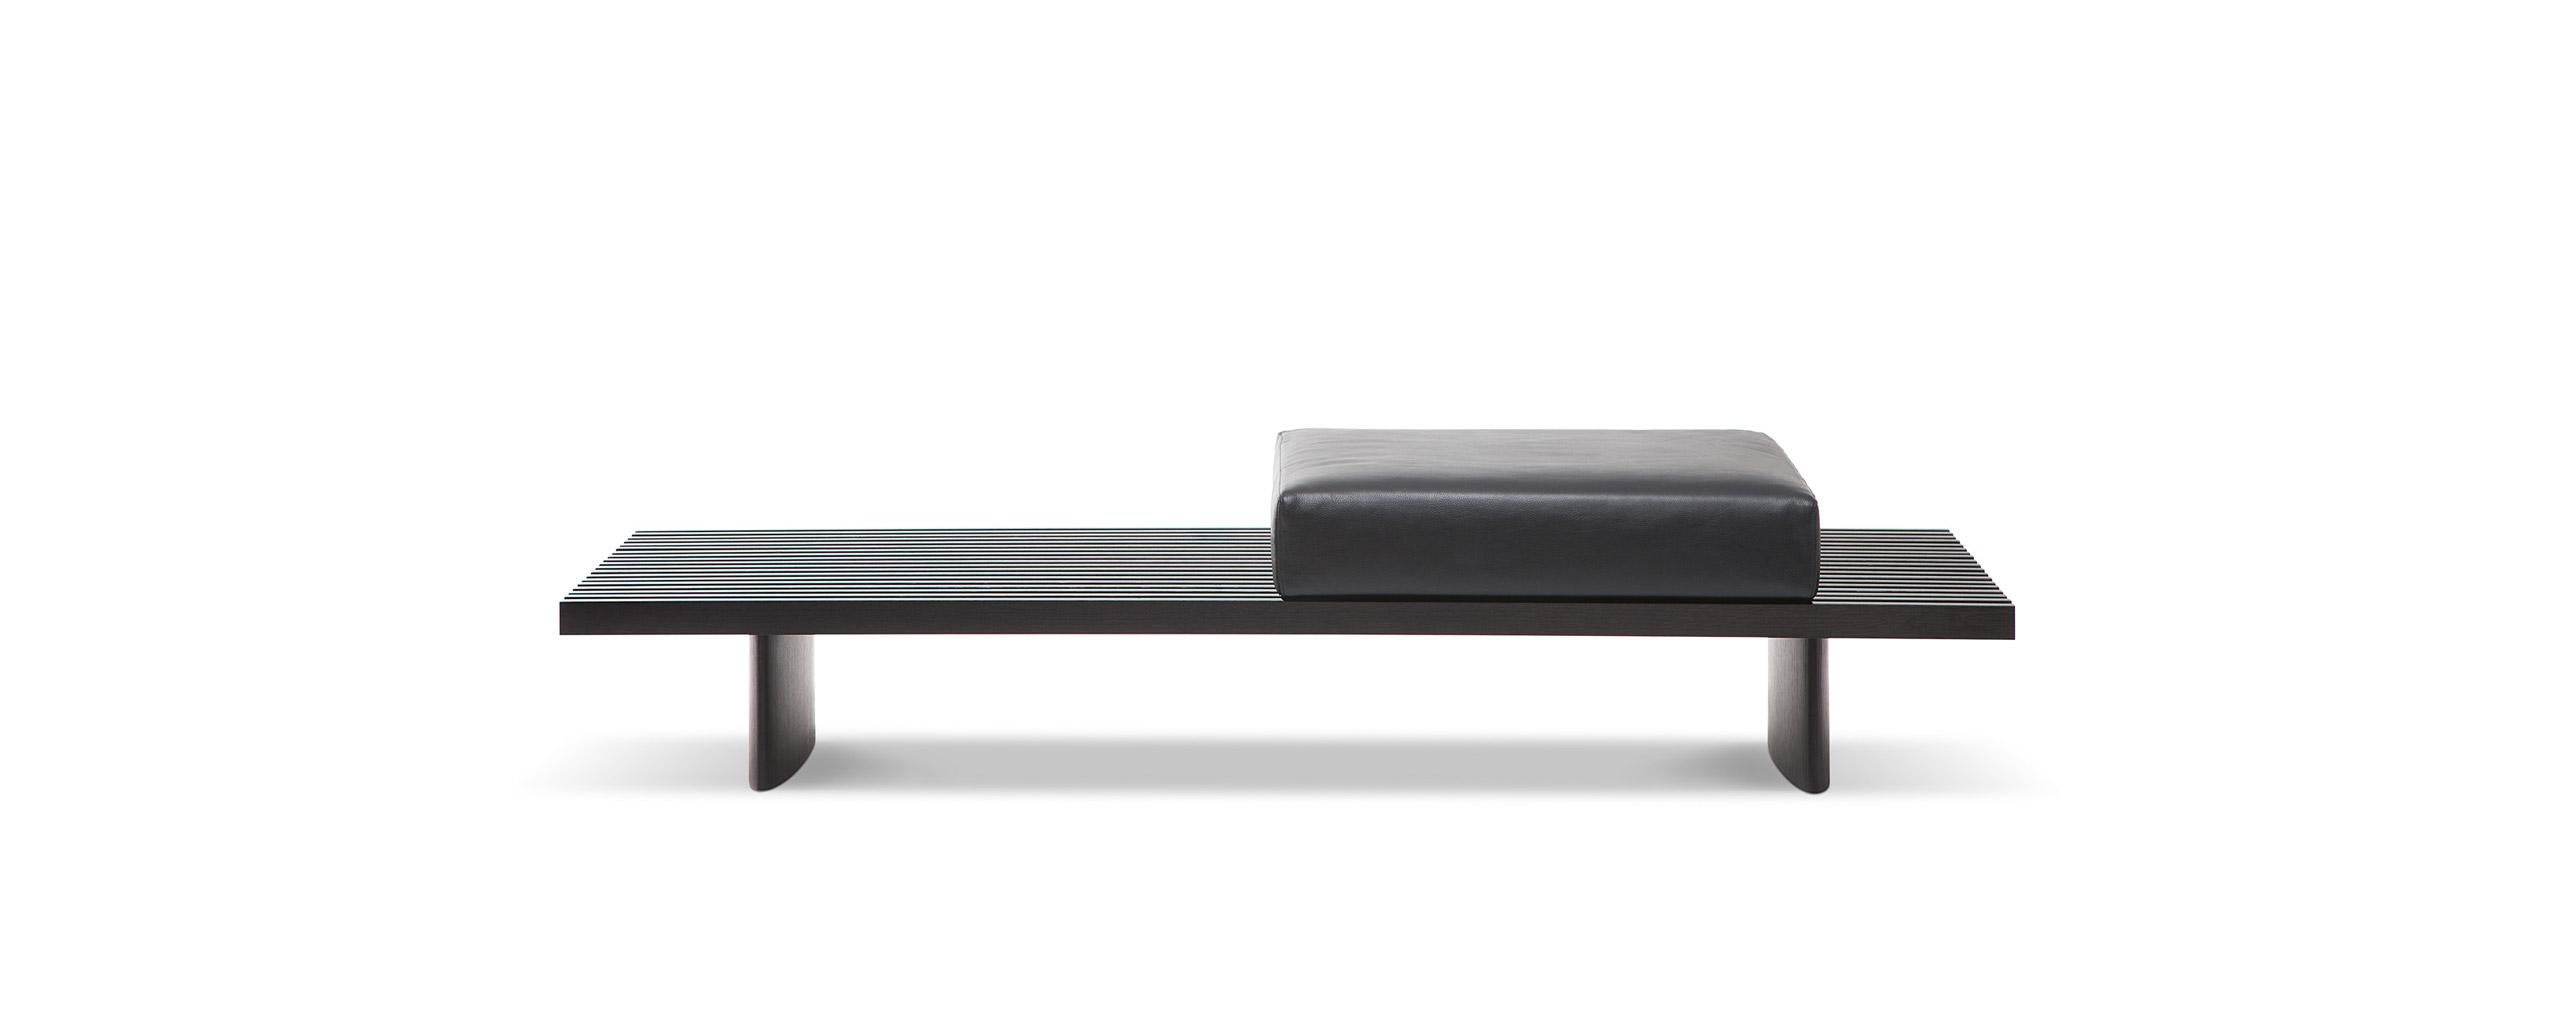 Wood Charlotte Perriand Refolo Low Table by Cassina For Sale